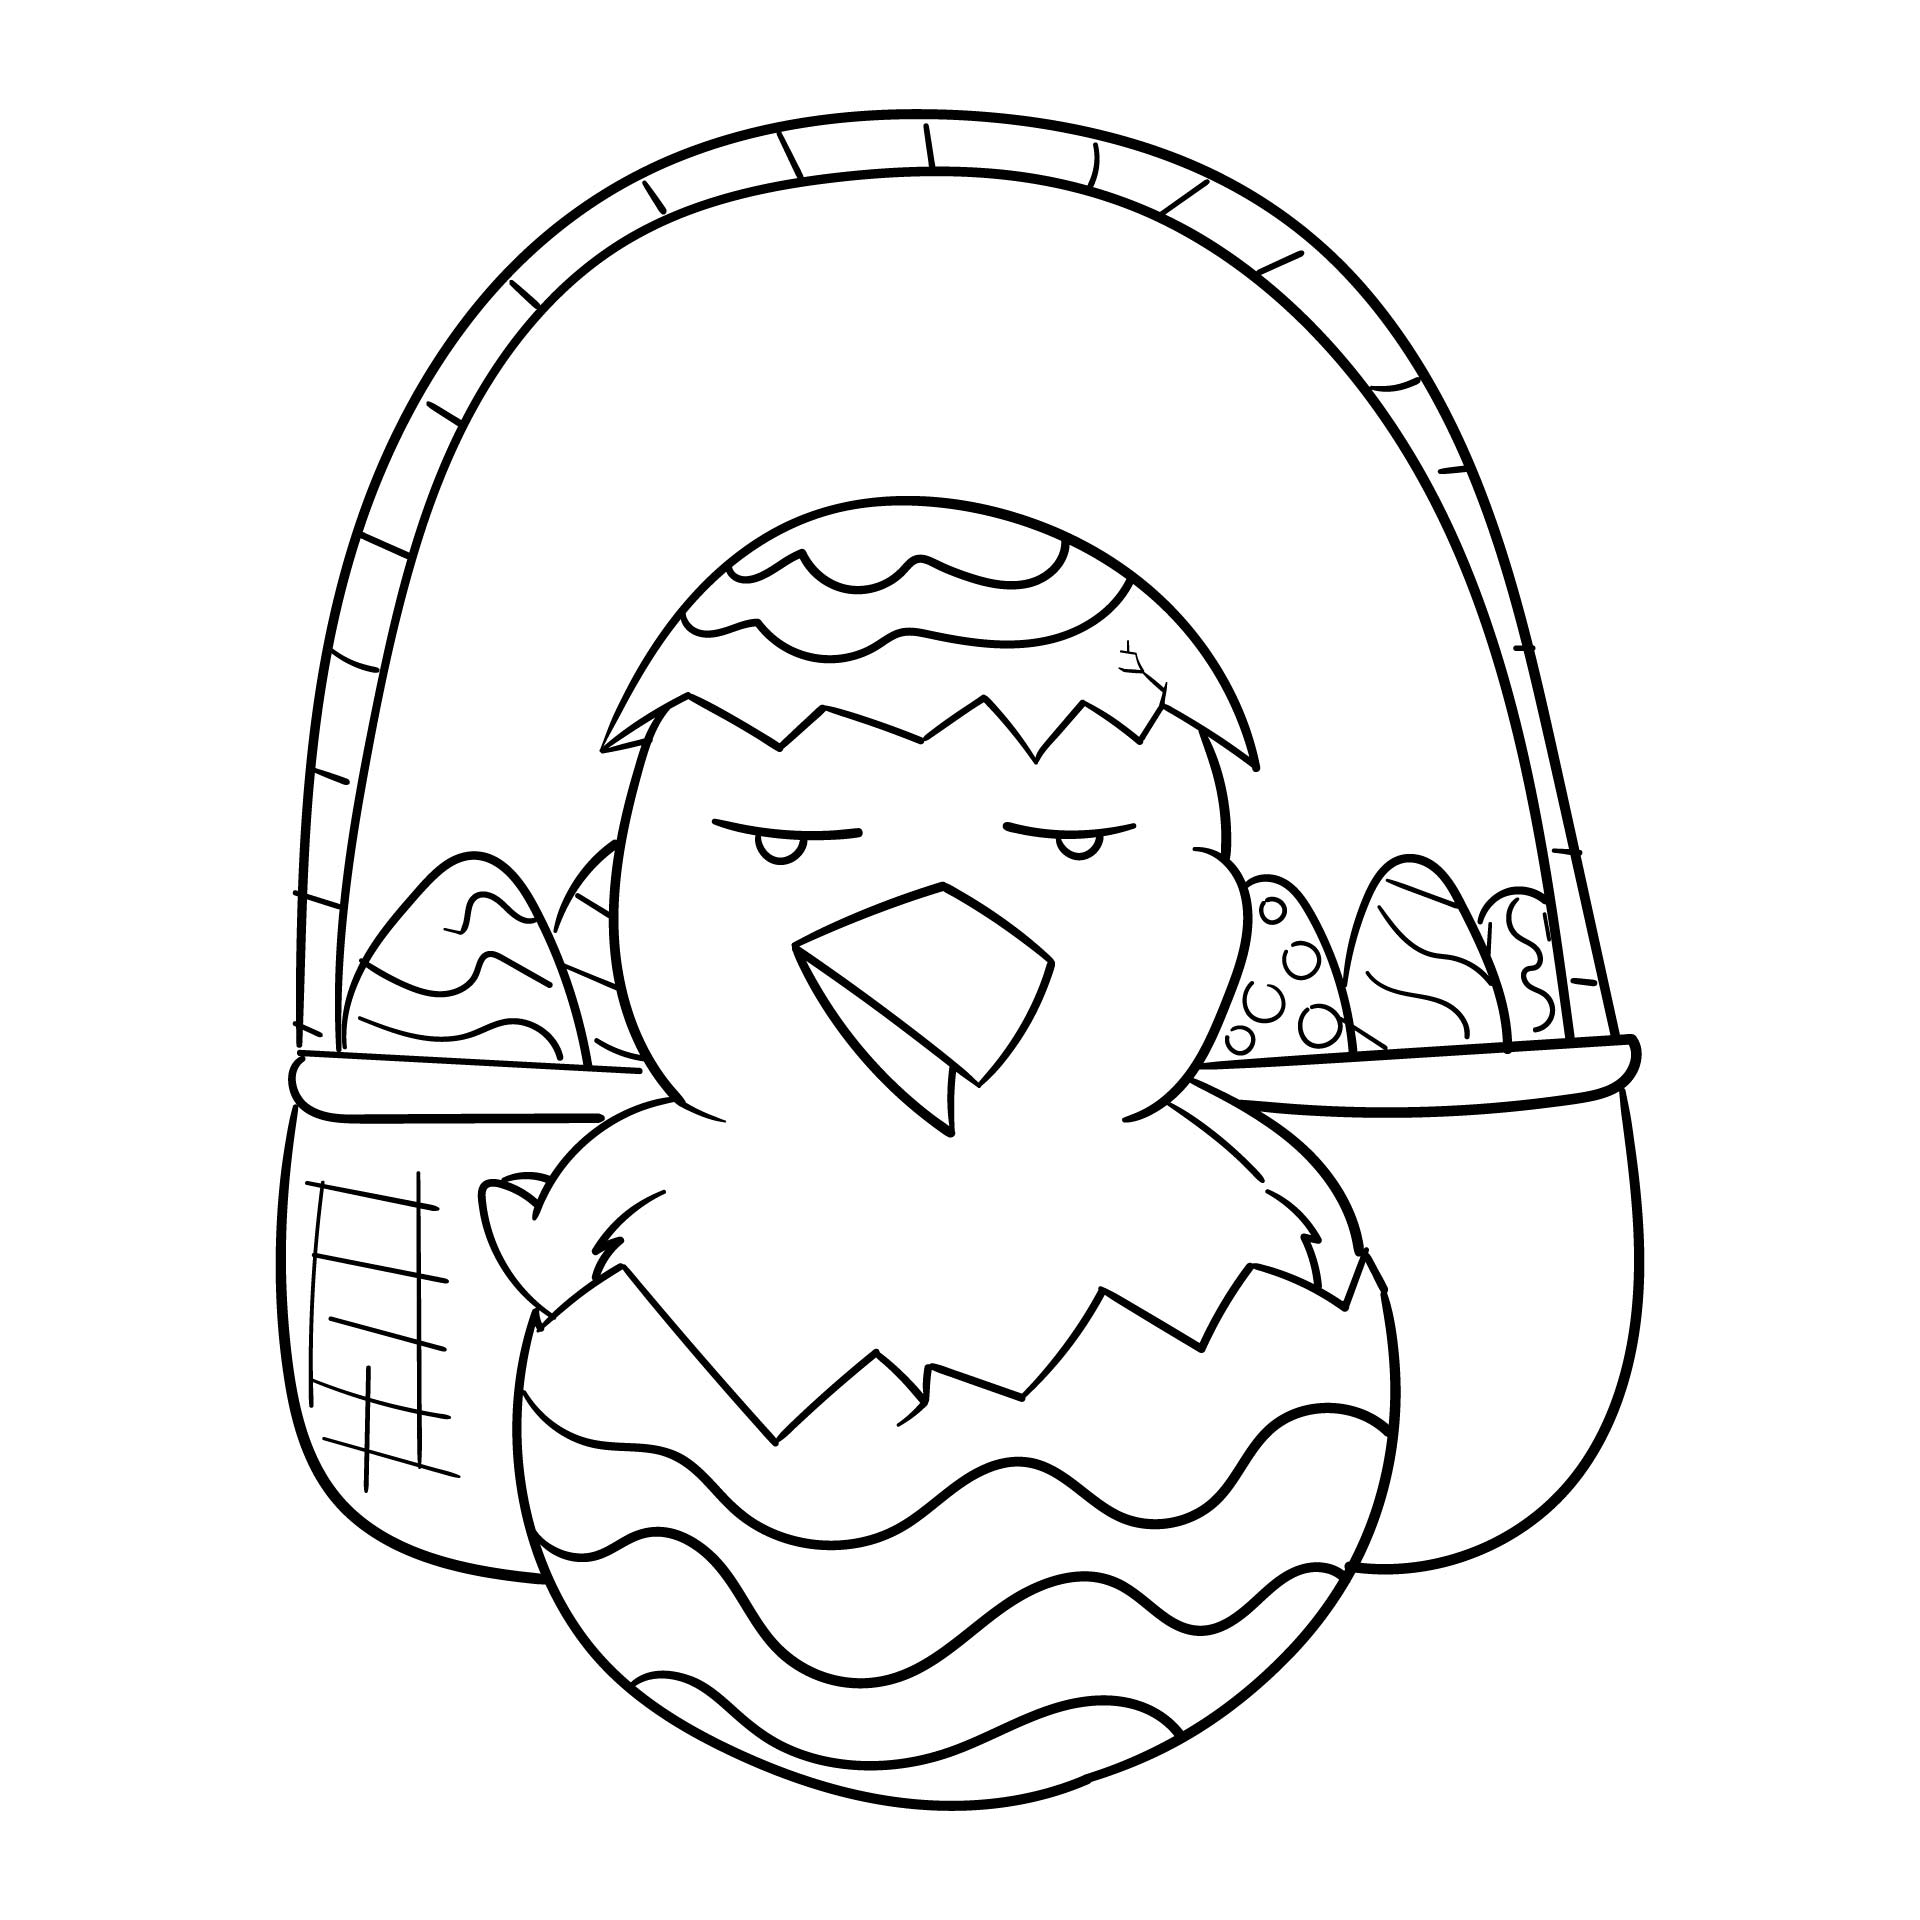 7-best-images-of-easter-chicks-outline-printable-chick-coloring-page-easter-colouring-bunny